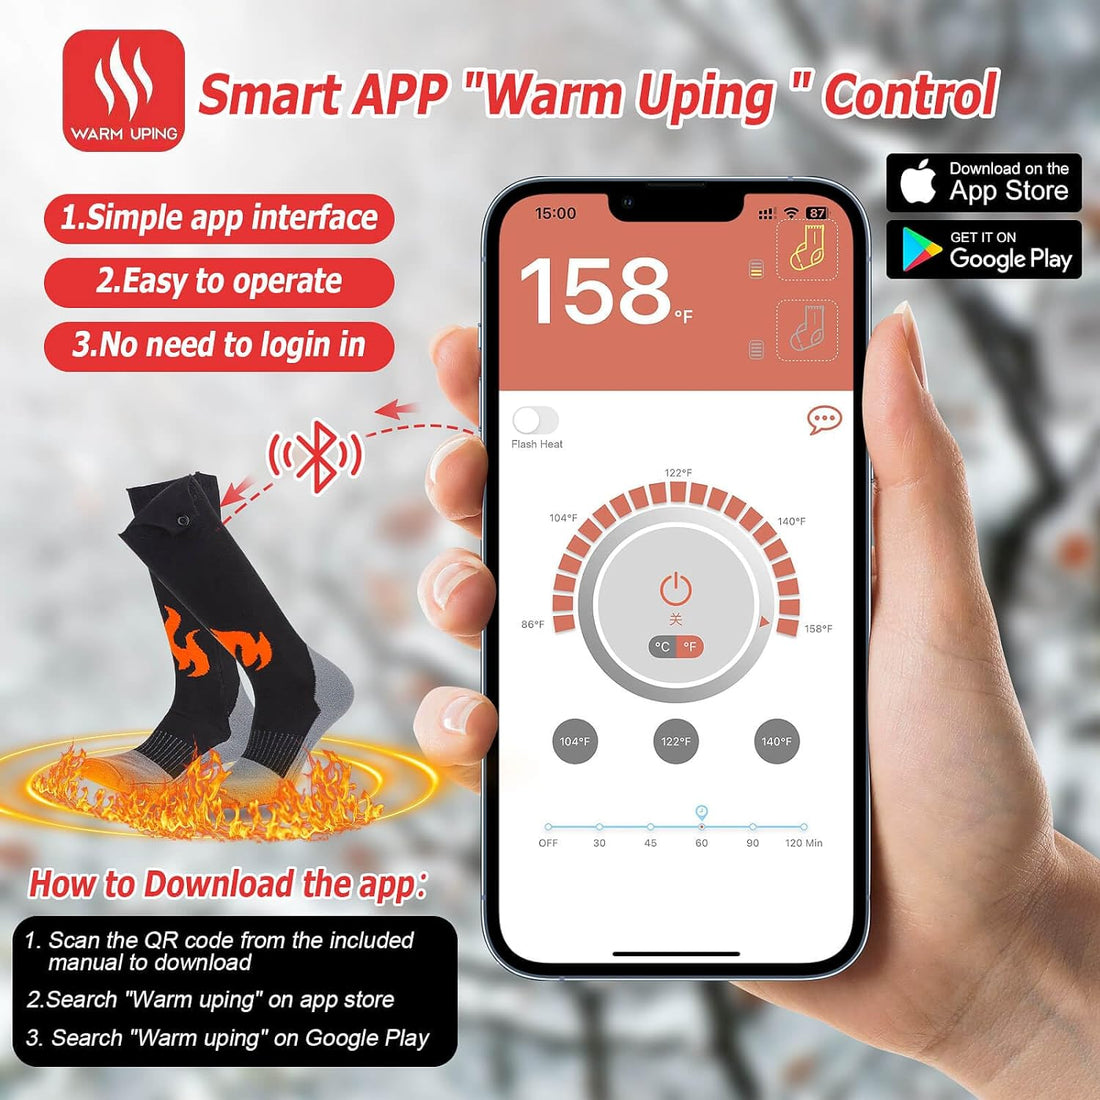 5000 mAh Electric Socks for Men Rechargeable, App-Controlled Timer Battery Woman Heated Socks 5 Temperature Electric Socks, Up to 11 Hours Foot Warmers for Women Hunting Fishing Hiking Camping, M